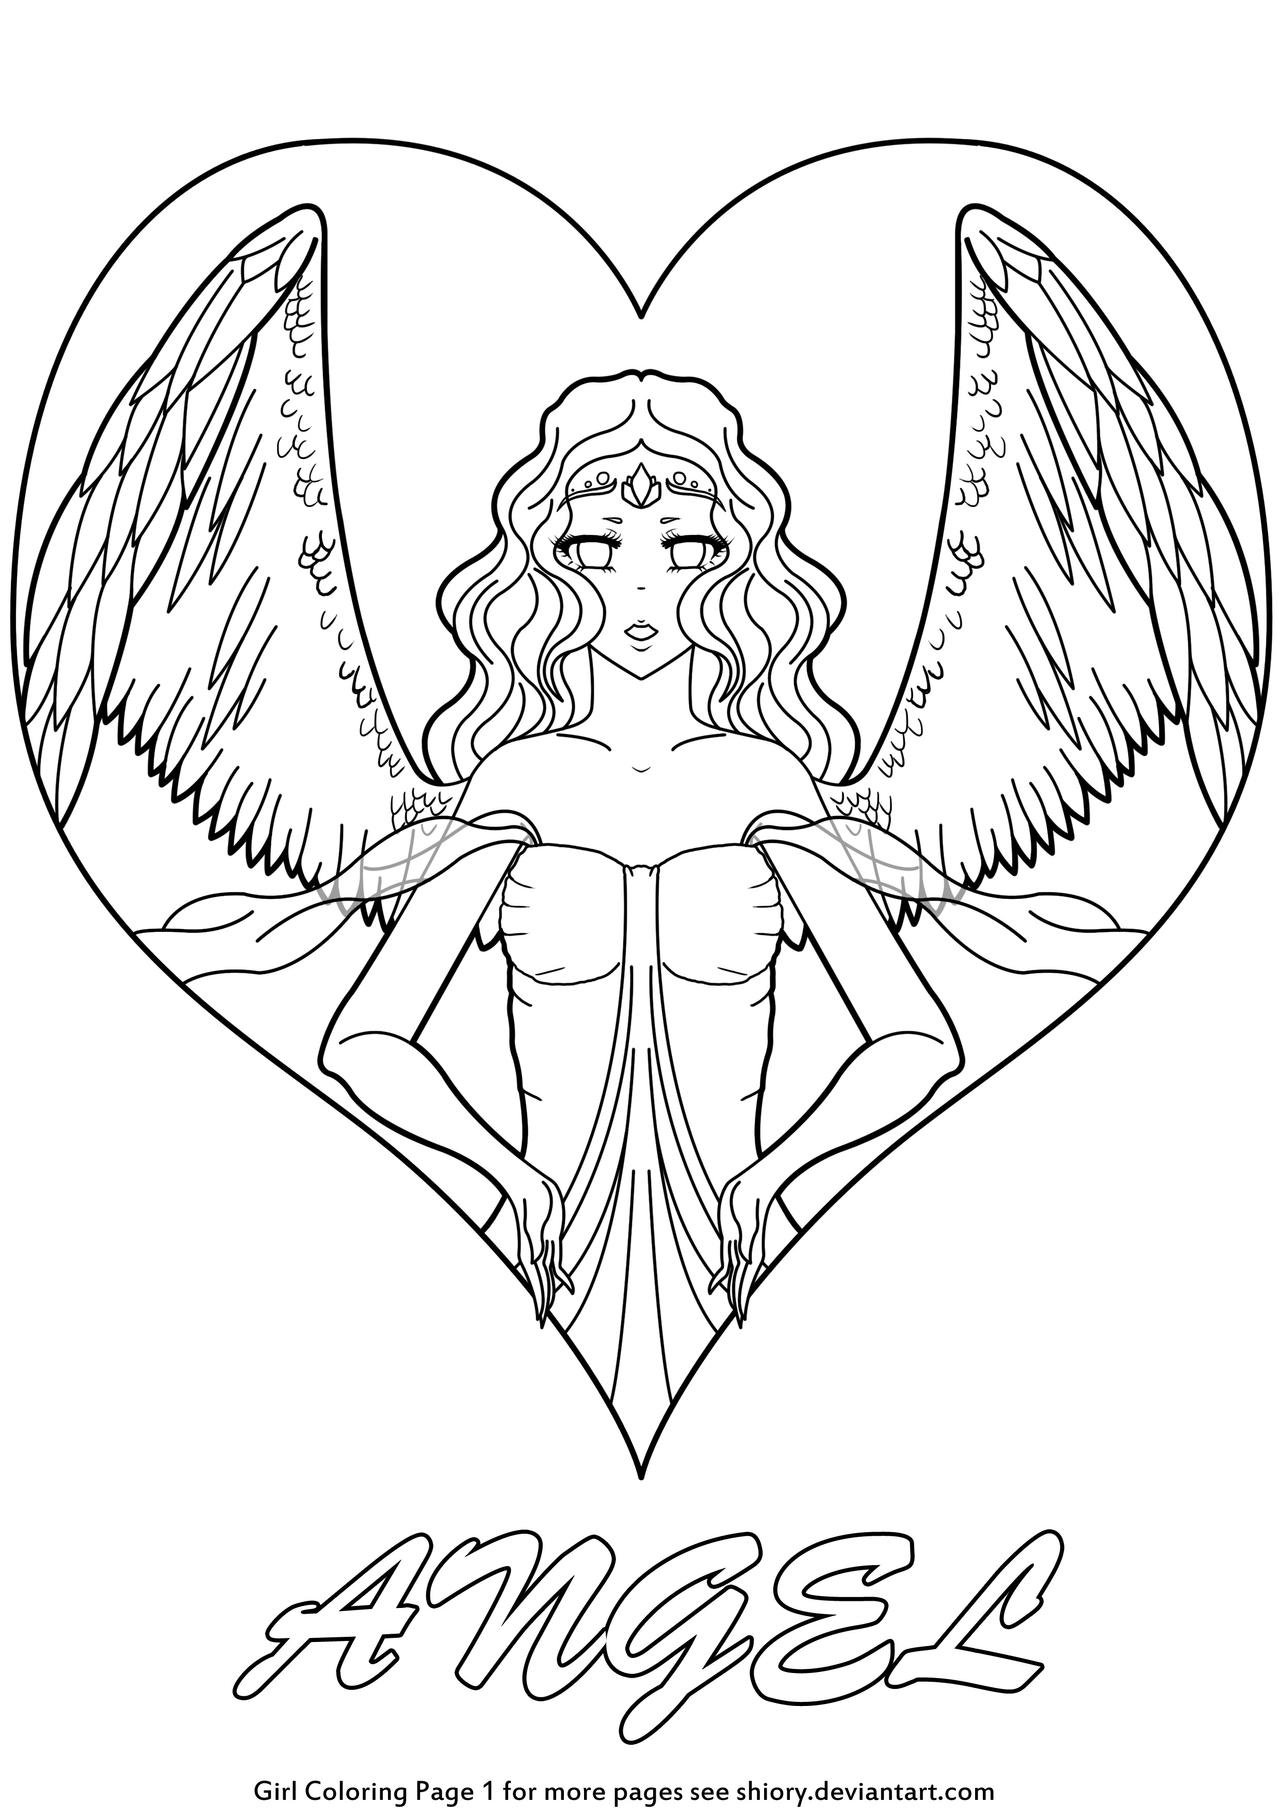 Girl Coloring Page 1 by shiory on DeviantArt